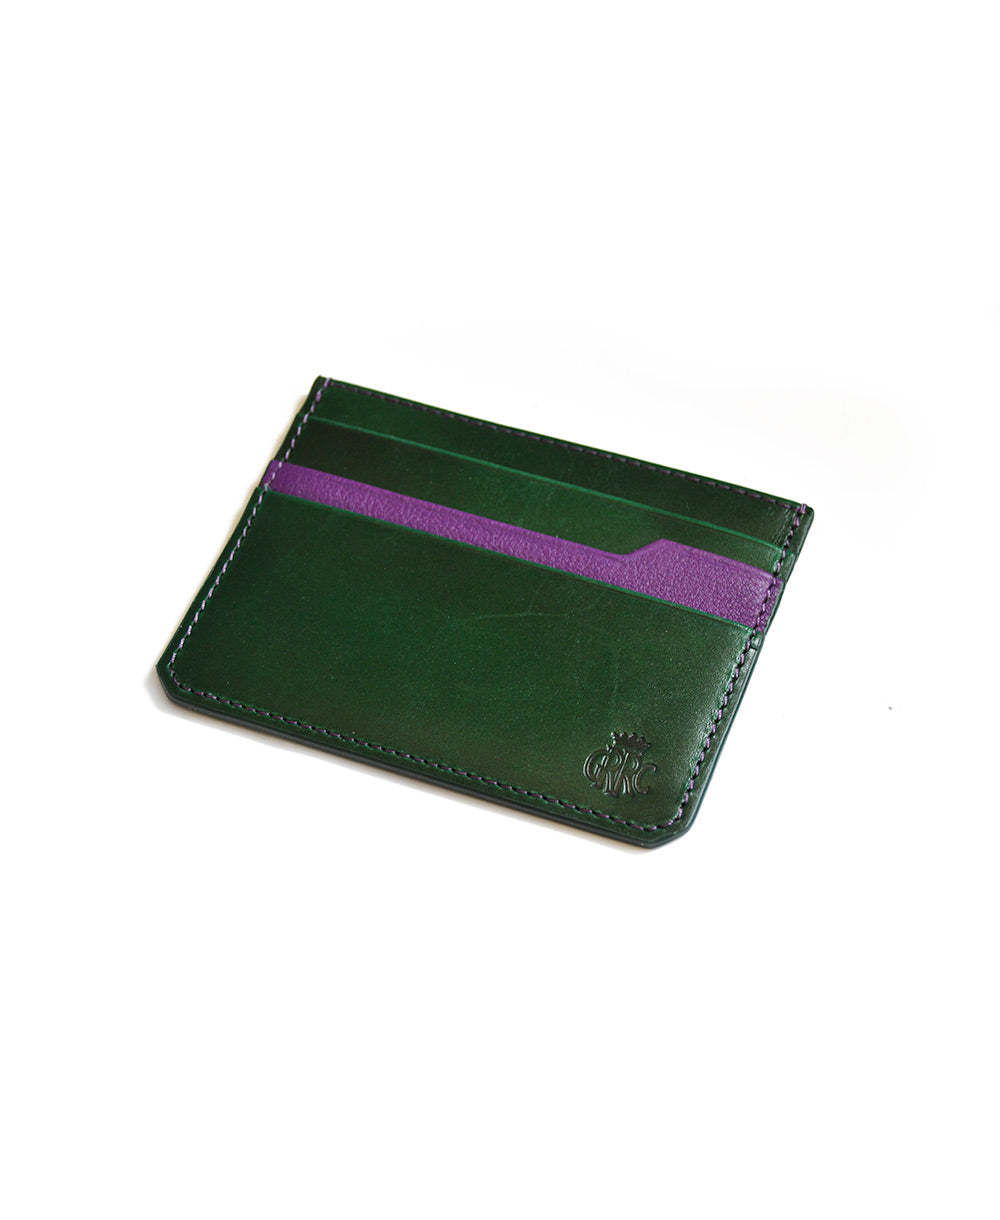 GRRC Leather Card Holder in Green & Purple